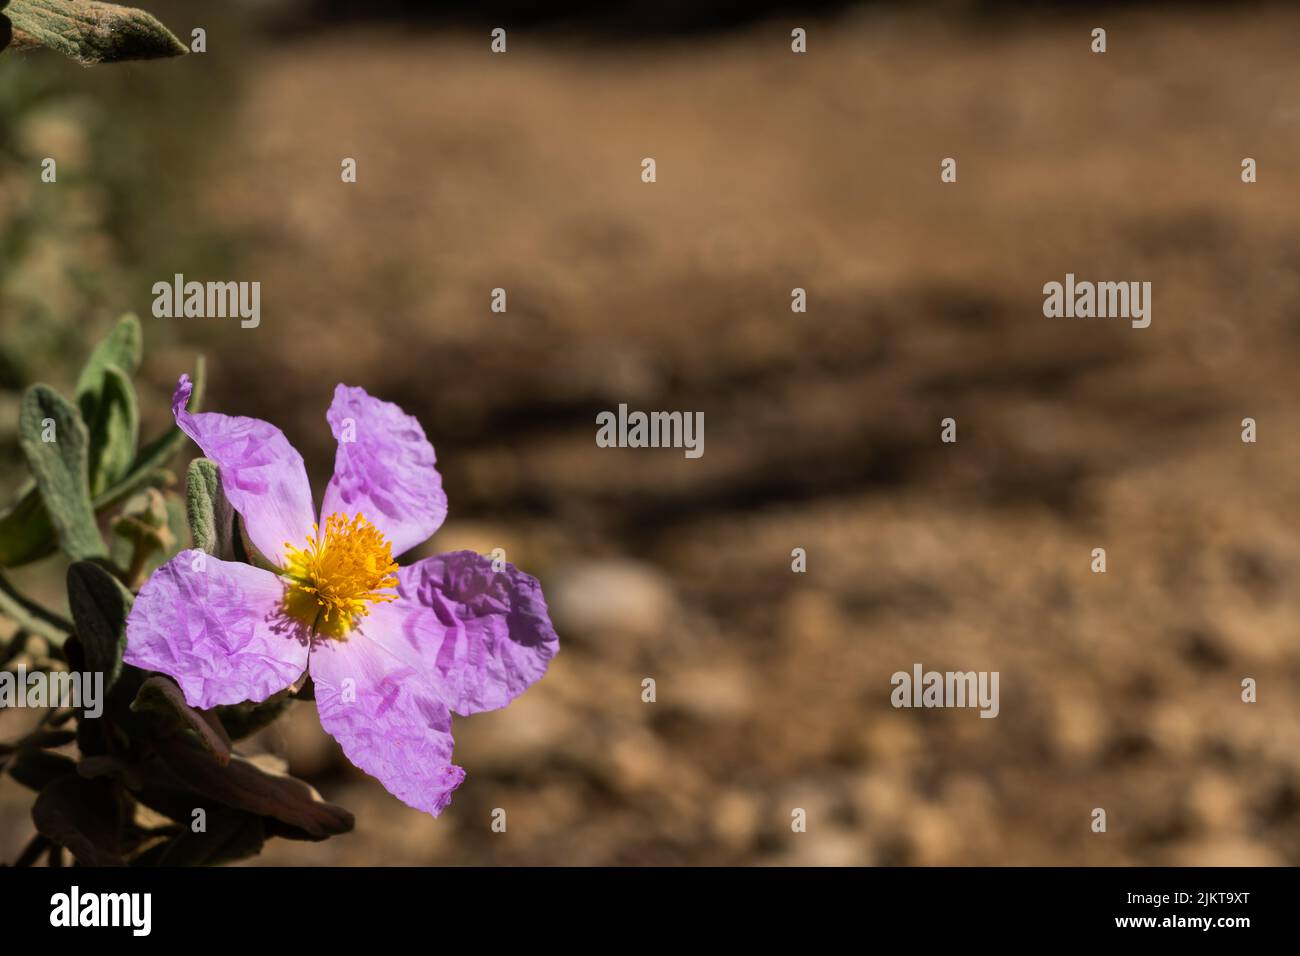 close-up of a rockrose (Cistus albanicus) flower with an out-of-focus dirt road in the background Stock Photo